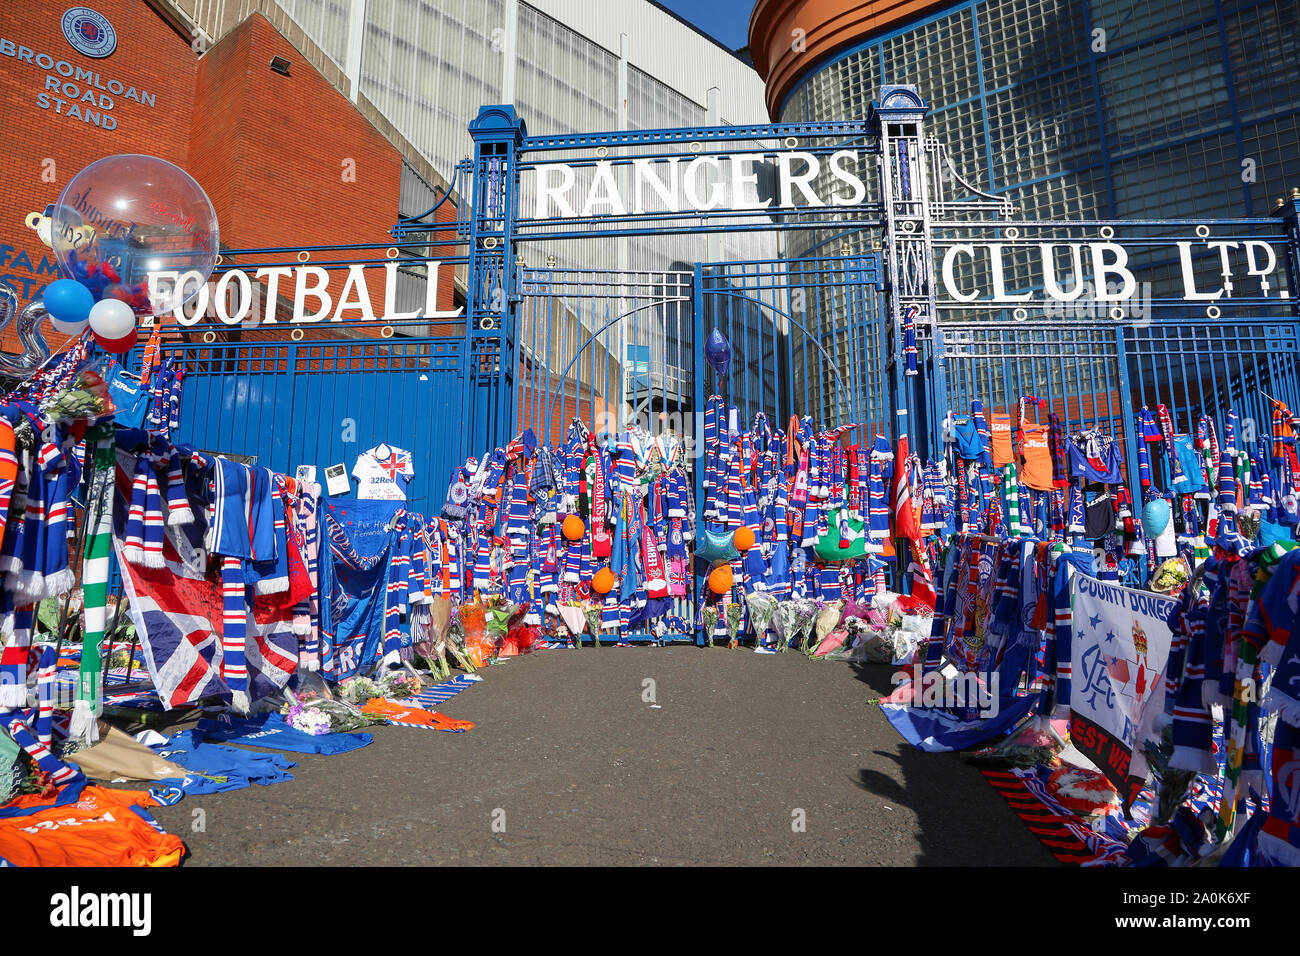 Glasgow, UK. 20th Sep, 2019. Tributes including flowers, scarves, football  tops, cards and cakes have been left at the Broomloan Road and Copland Road  gates of Ibrox Football Stadium, the home of